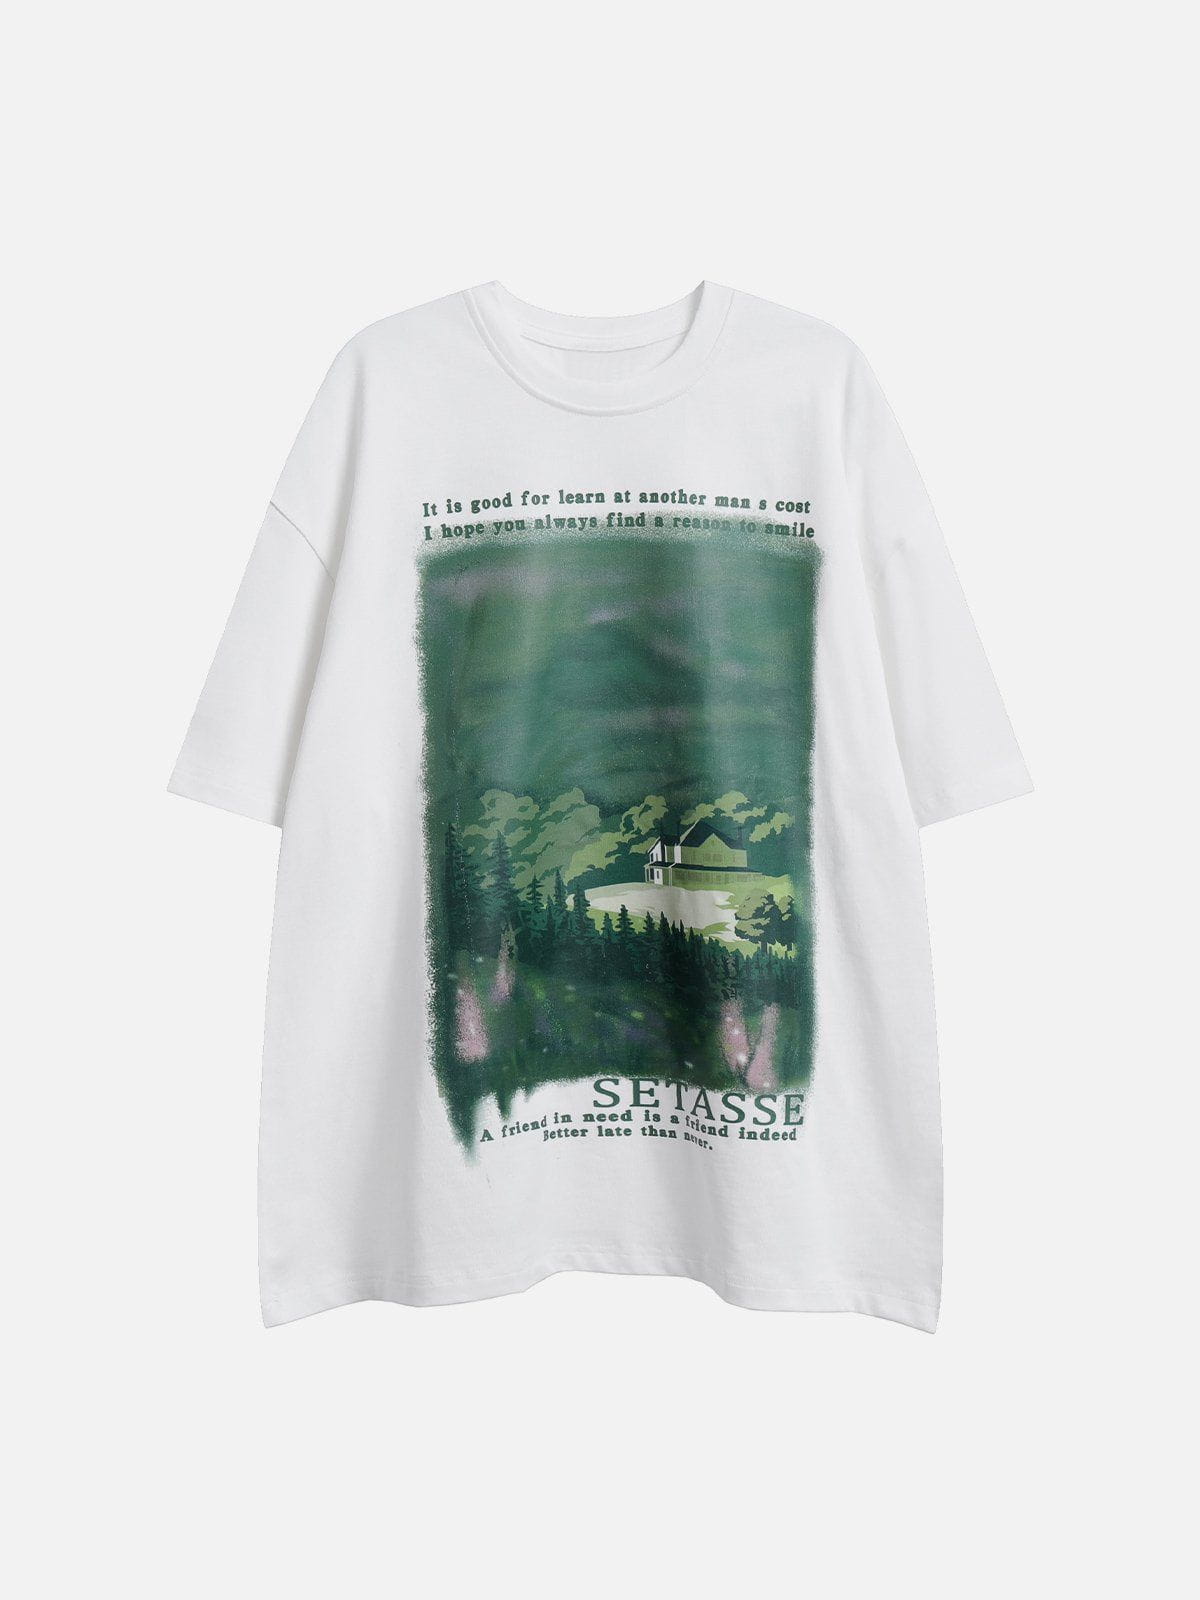 Sneakerland™ - Forest House Print Tee